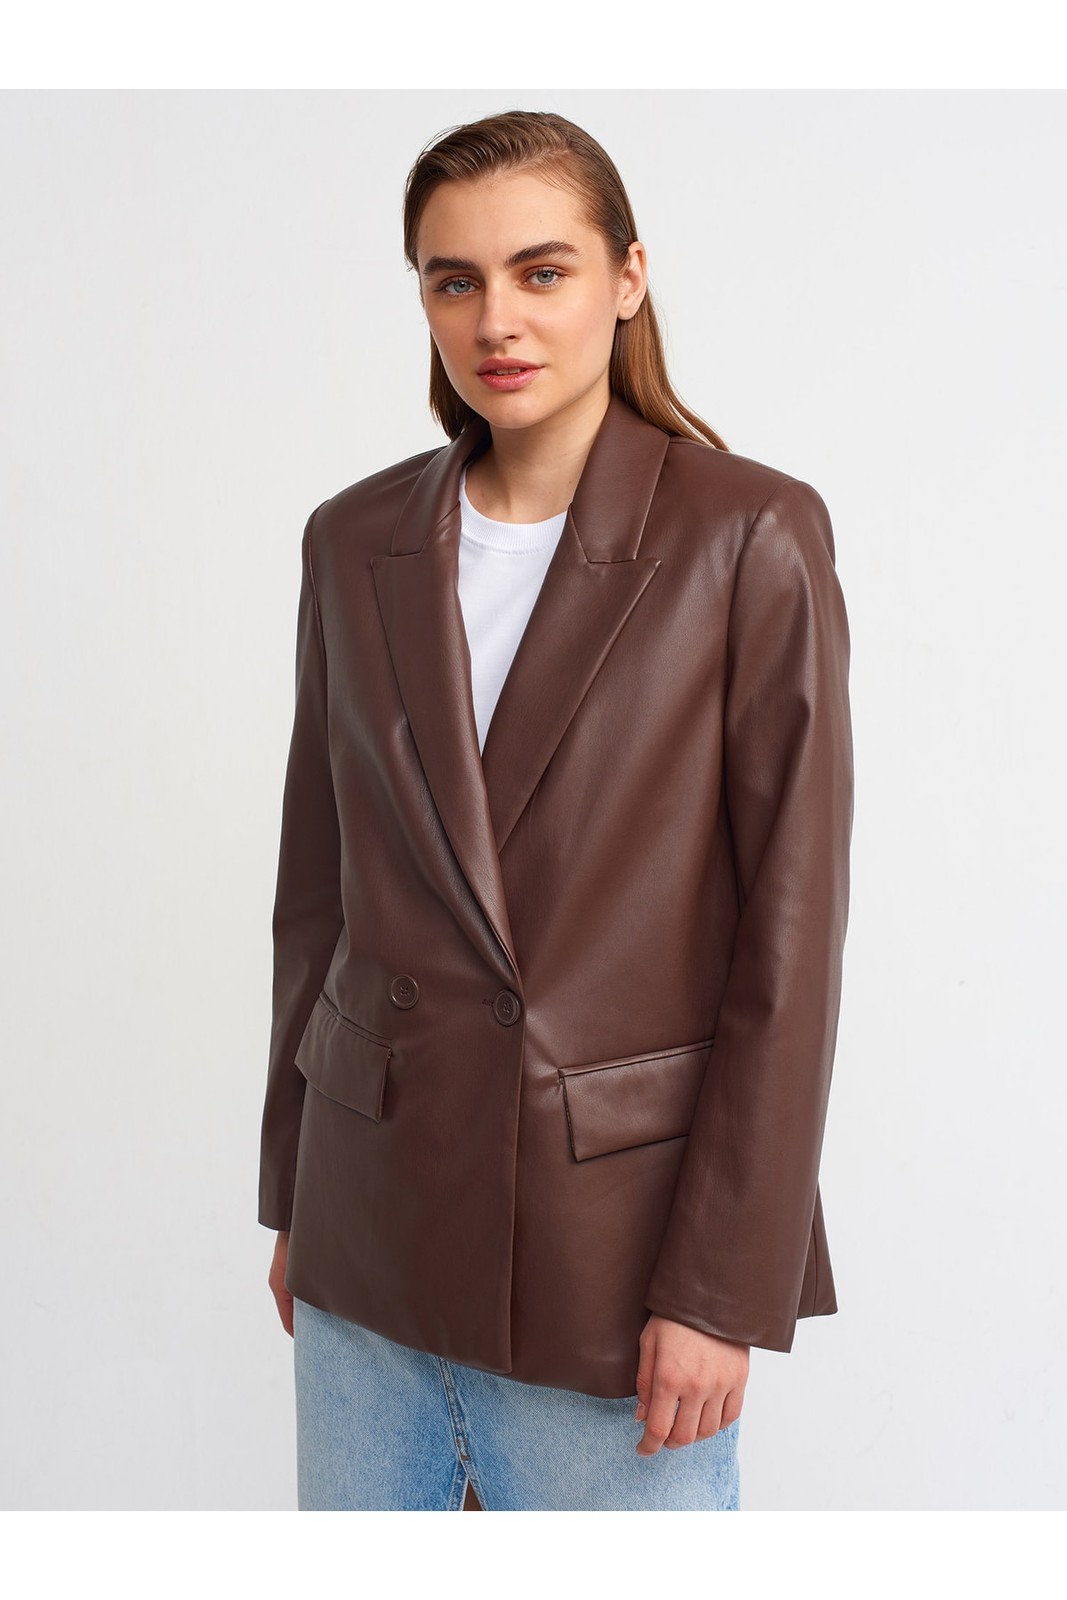 Dilvin 6939 Leather Jacket-brown